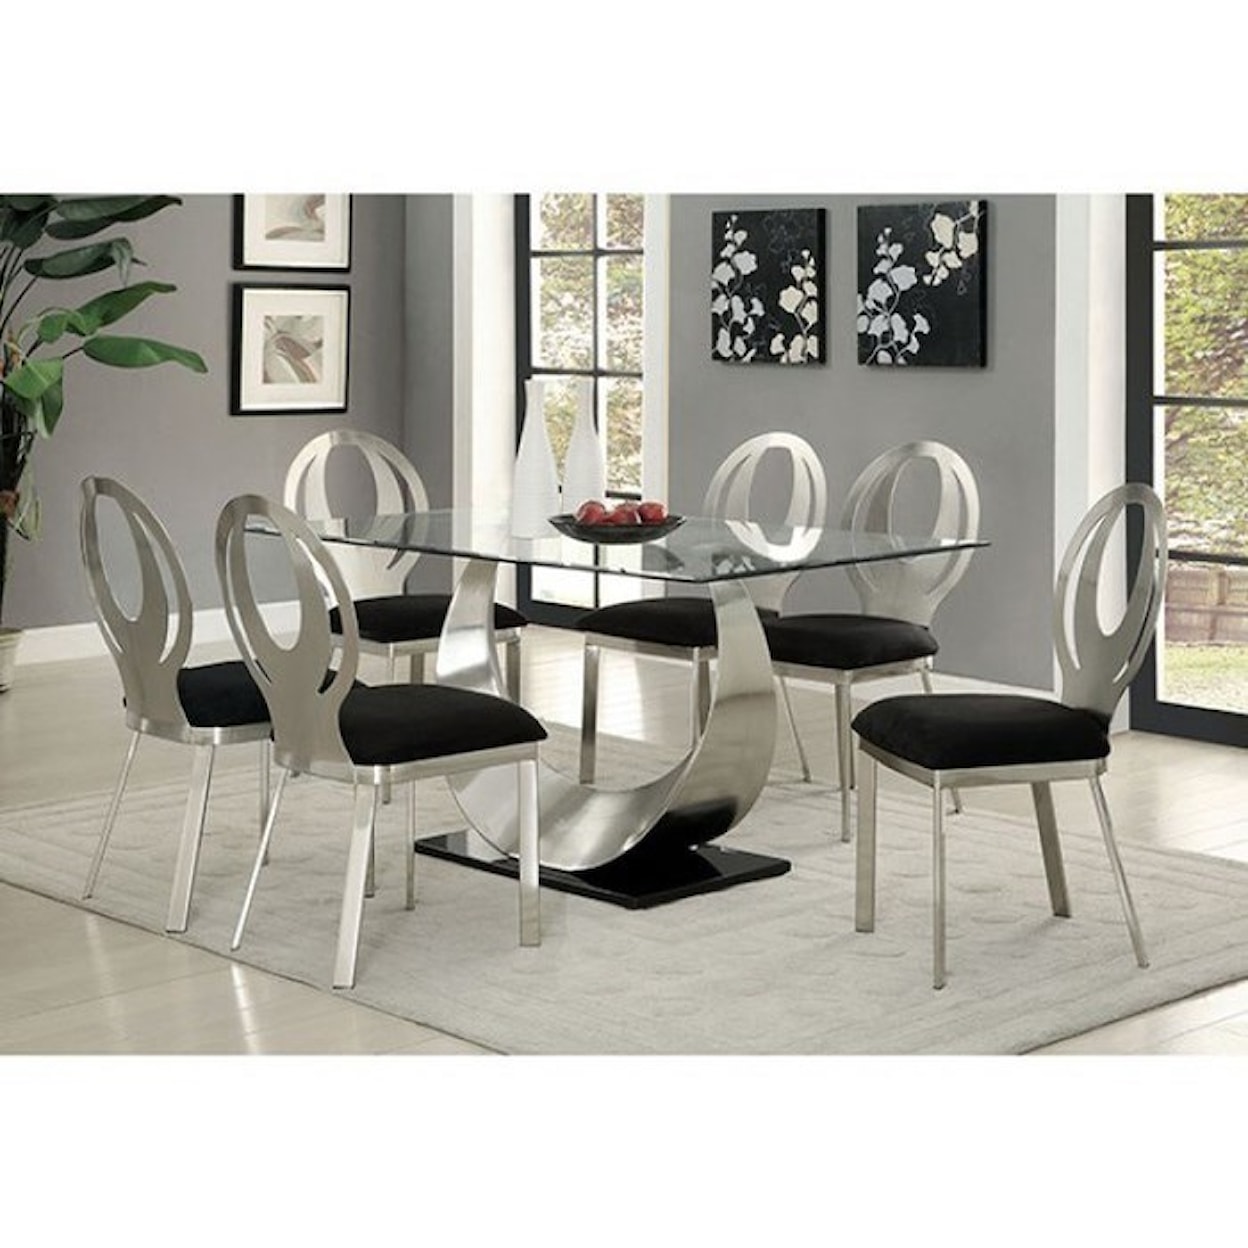 FUSA Orla Table and 6 Side Chairs